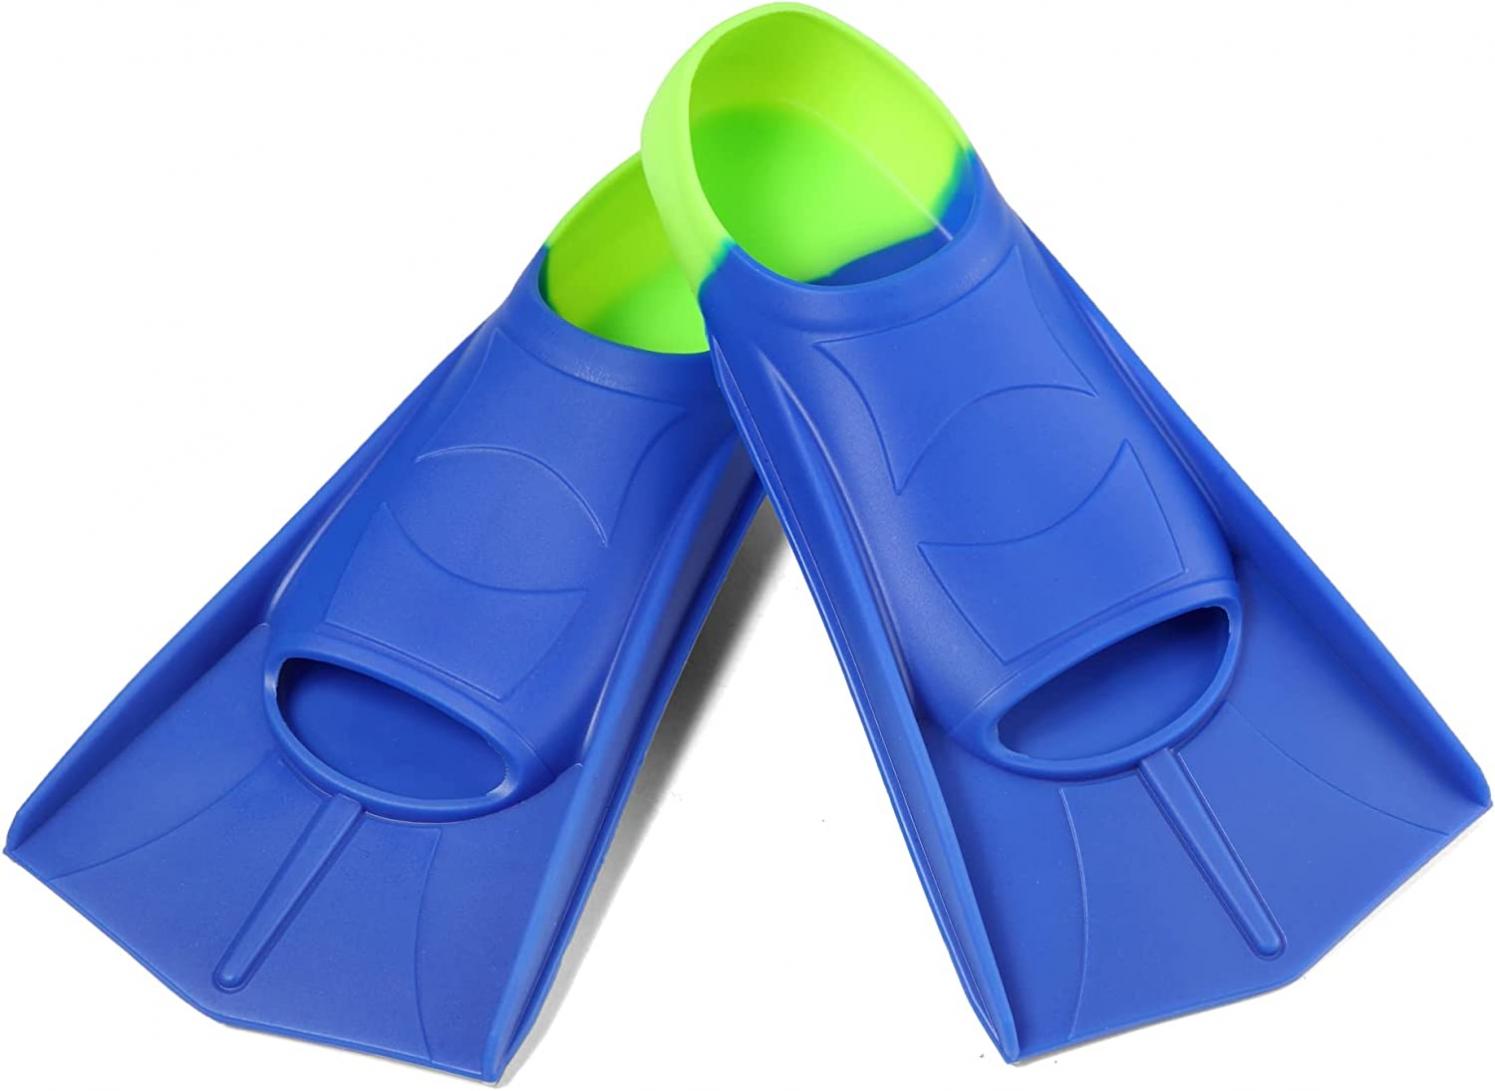 Fanwill Kids Swim Fins,Short Fins Swimming Flippers for Lap Swimming and Training for Child,Girls,Boys